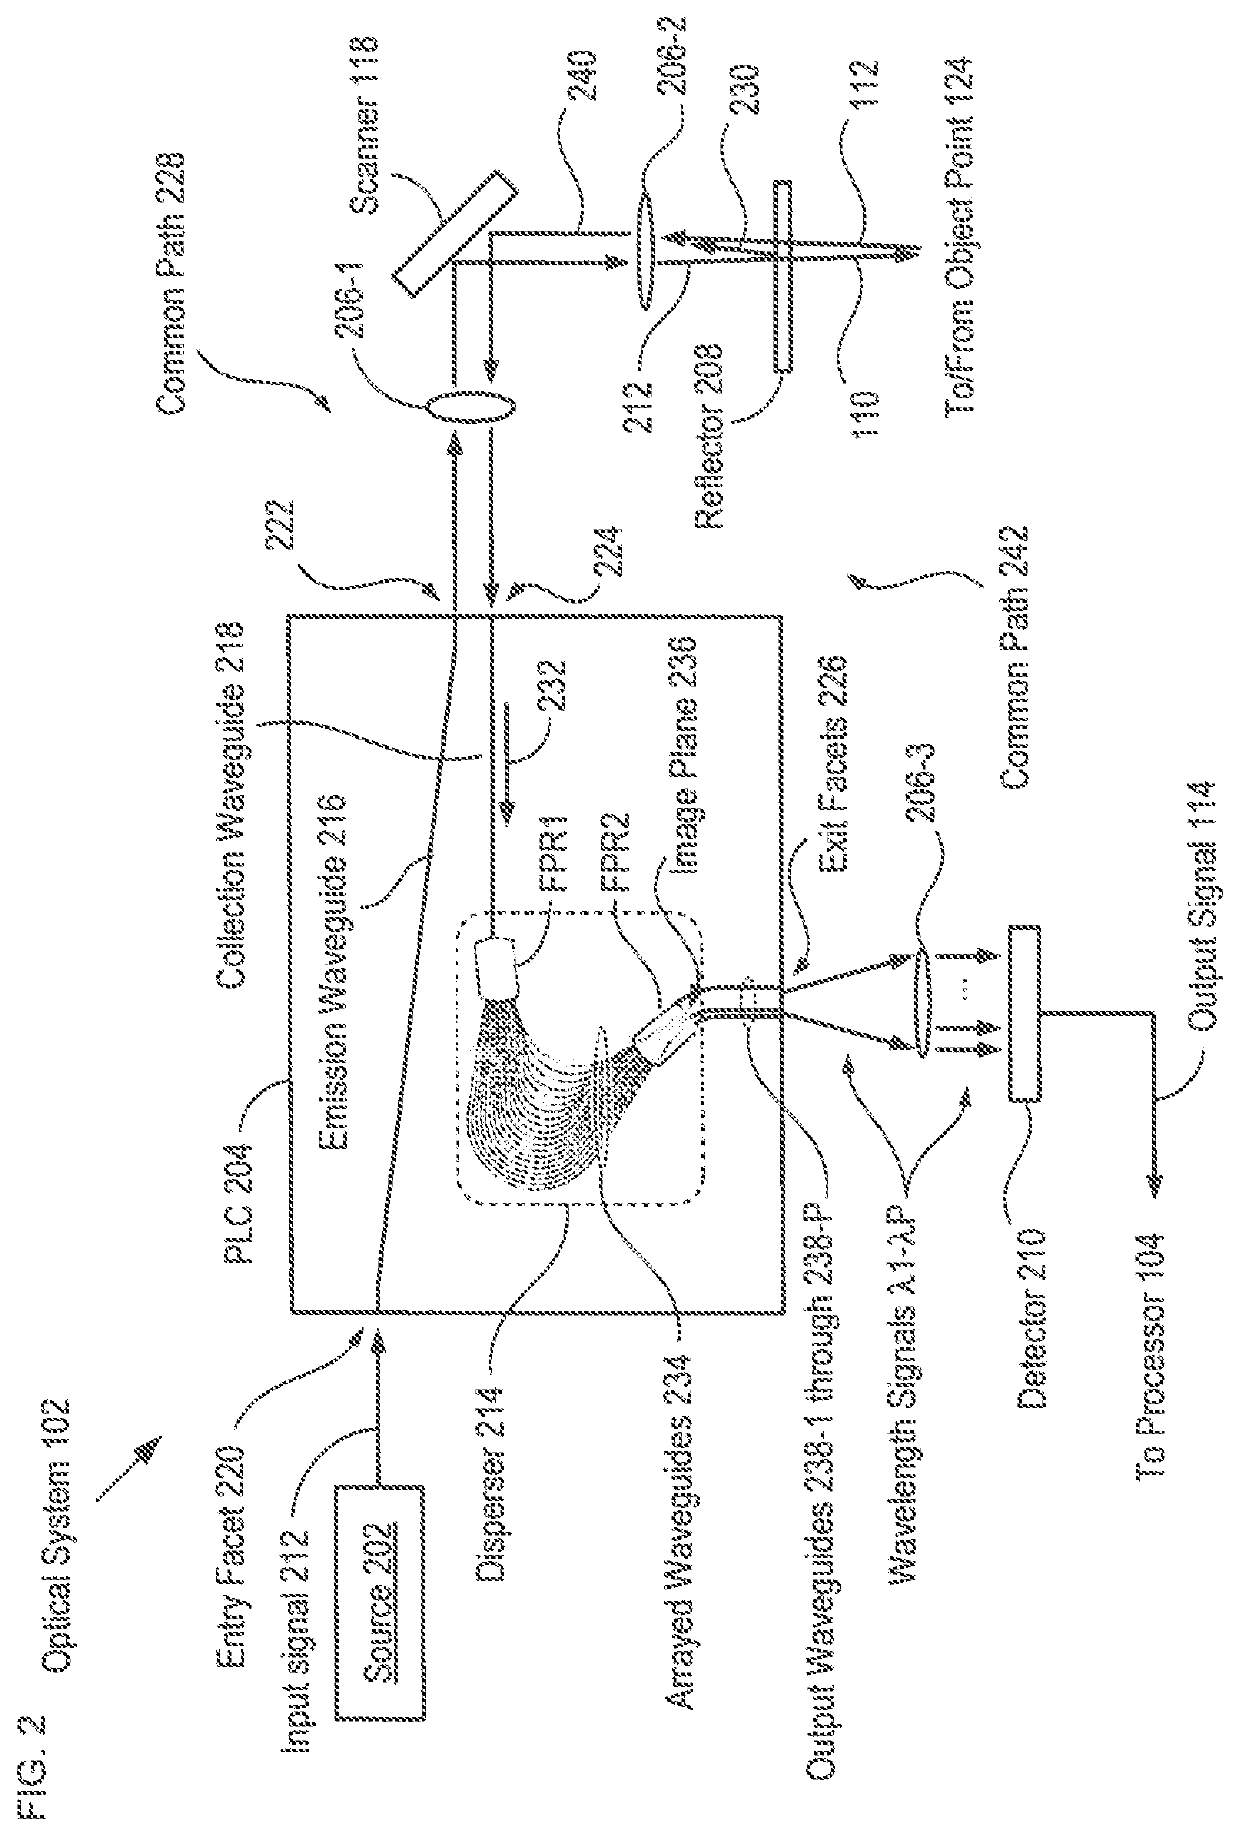 Common-path integrated low coherence interferometry system and method therefor